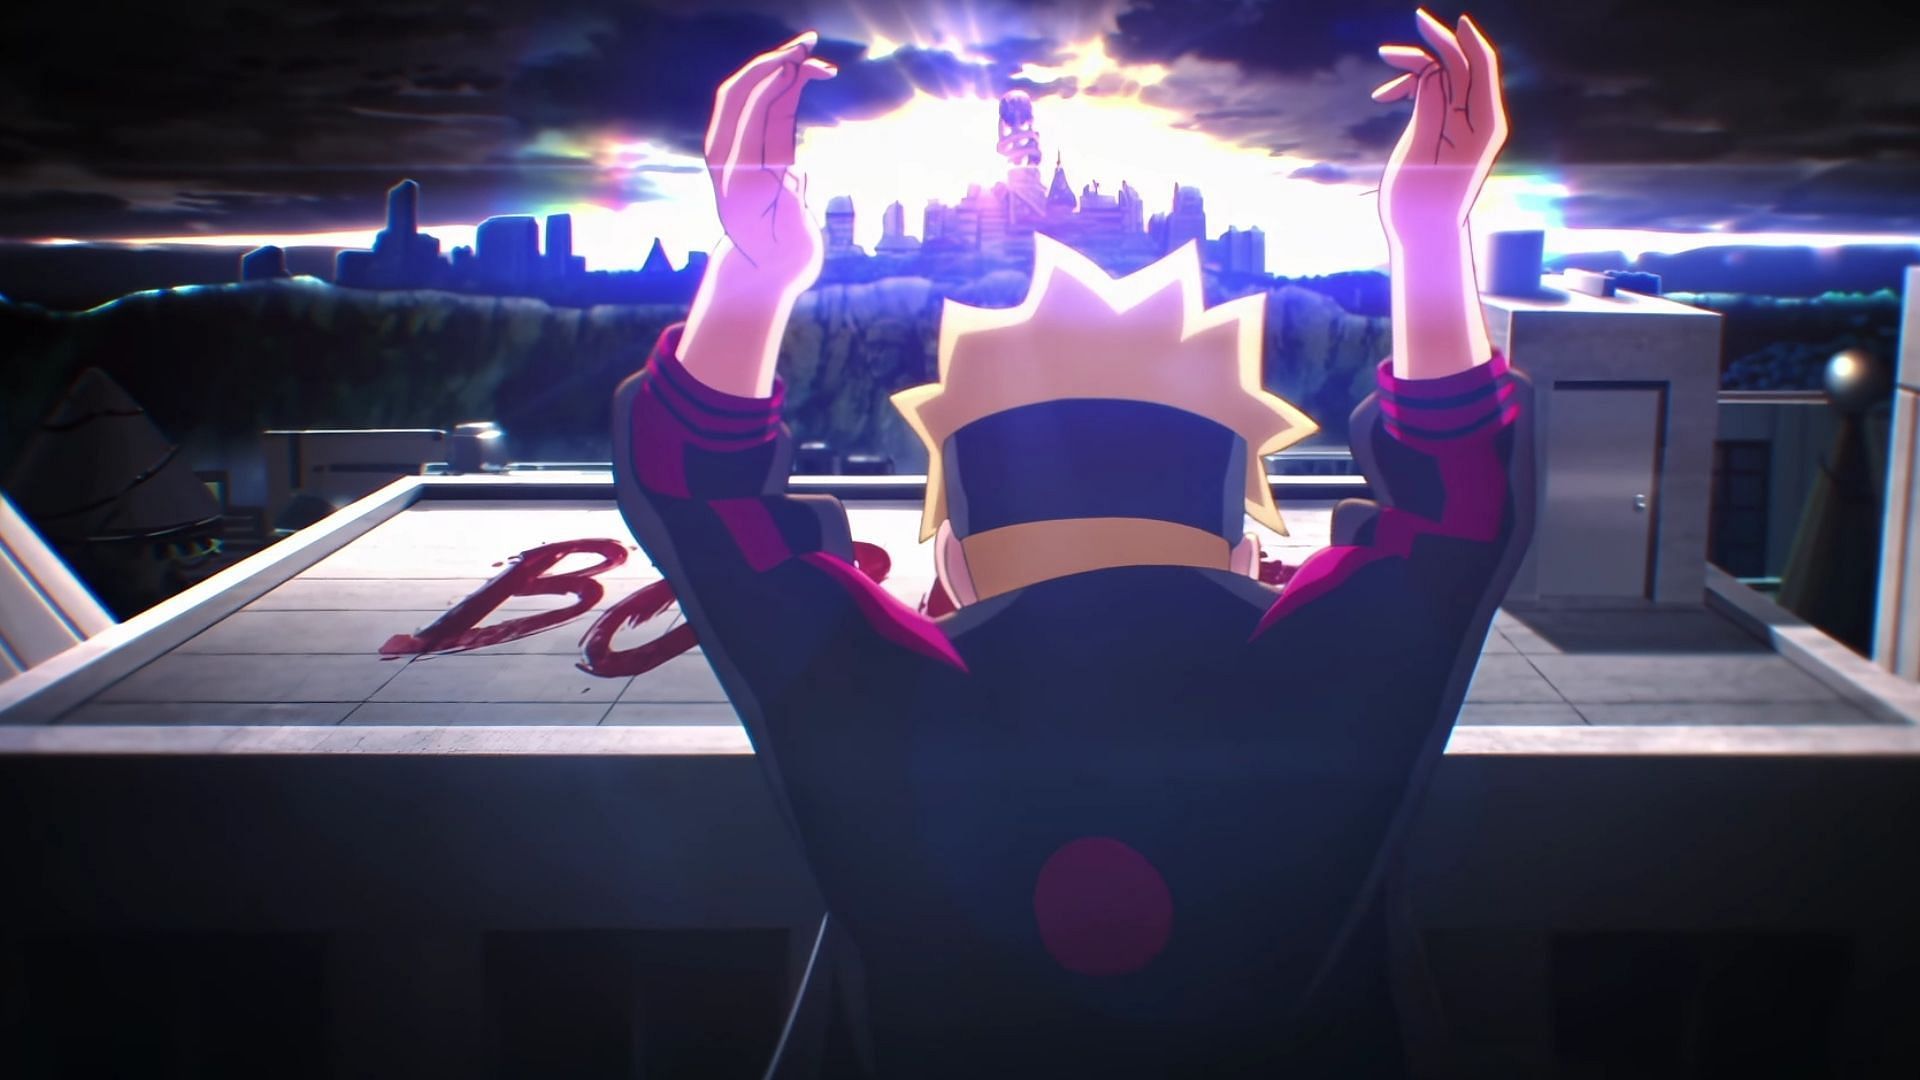 Boruto episode 288: Release date, where to watch, what to expect, and more